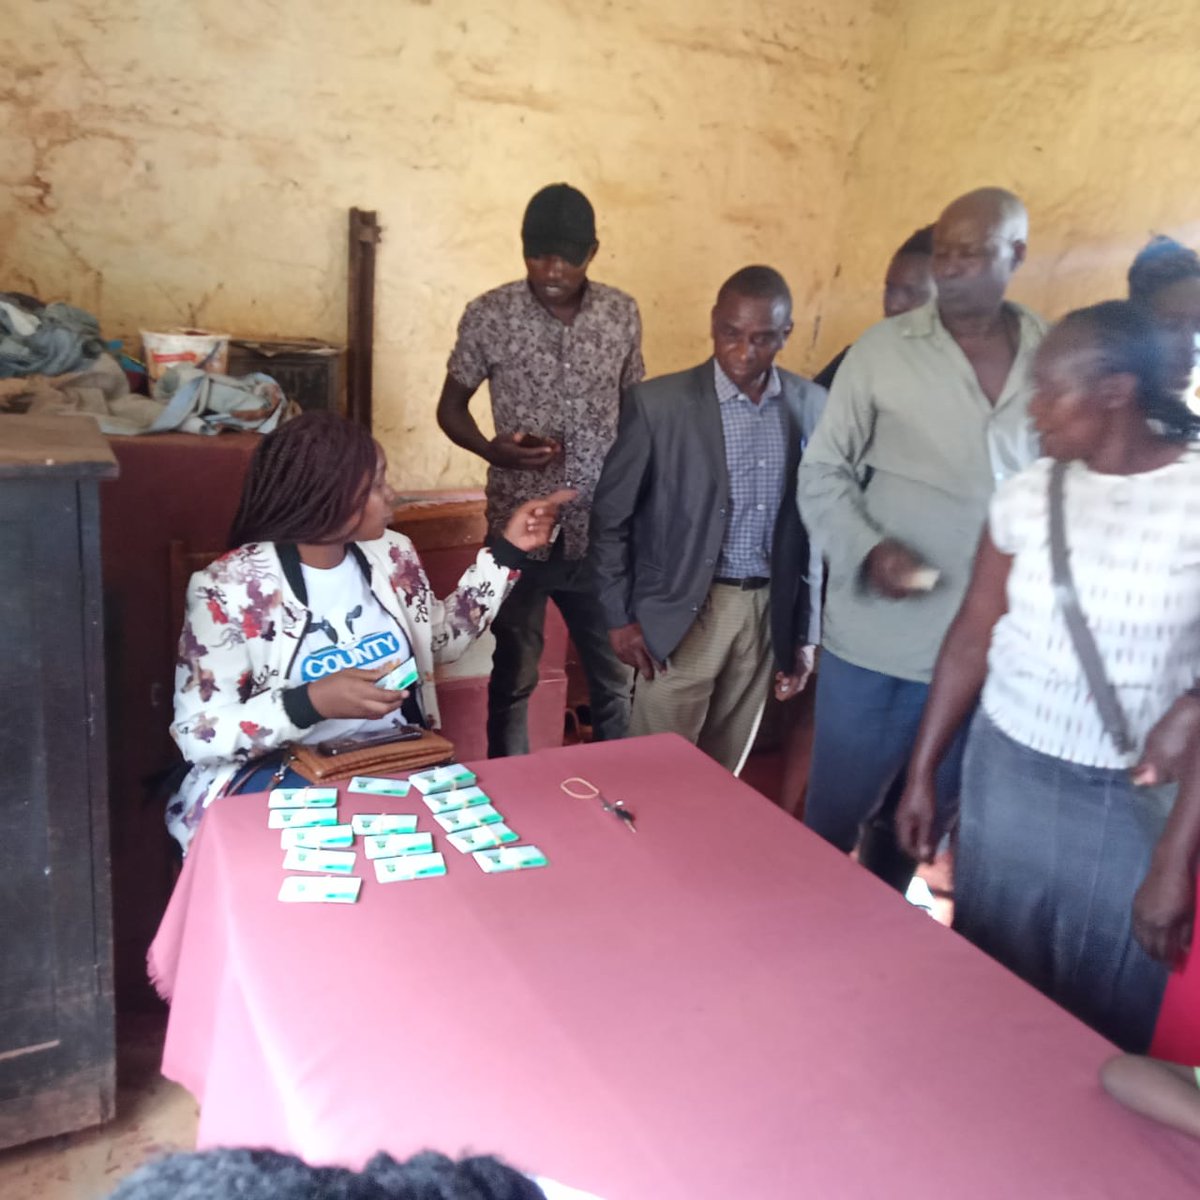 Inua Mkulima cards are now working. Farmers redeeming various items in Muranga County.